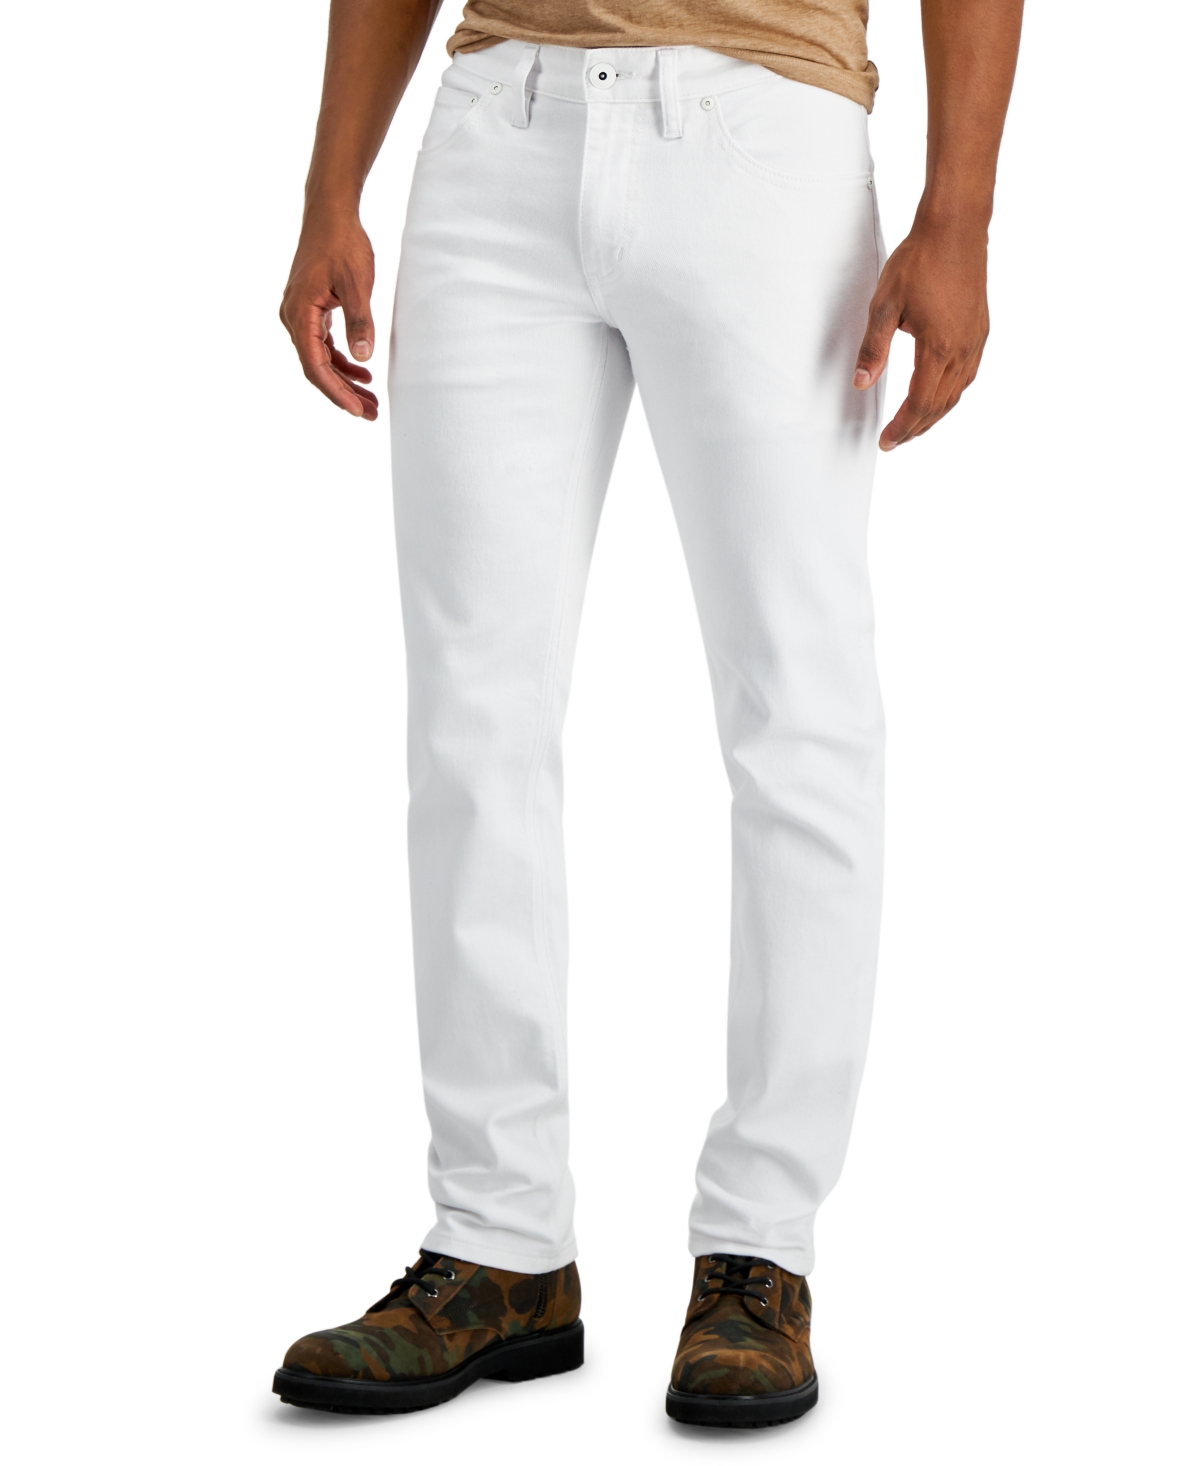 Men's Slim Straight Jeans, Created for Macy's - White Wash